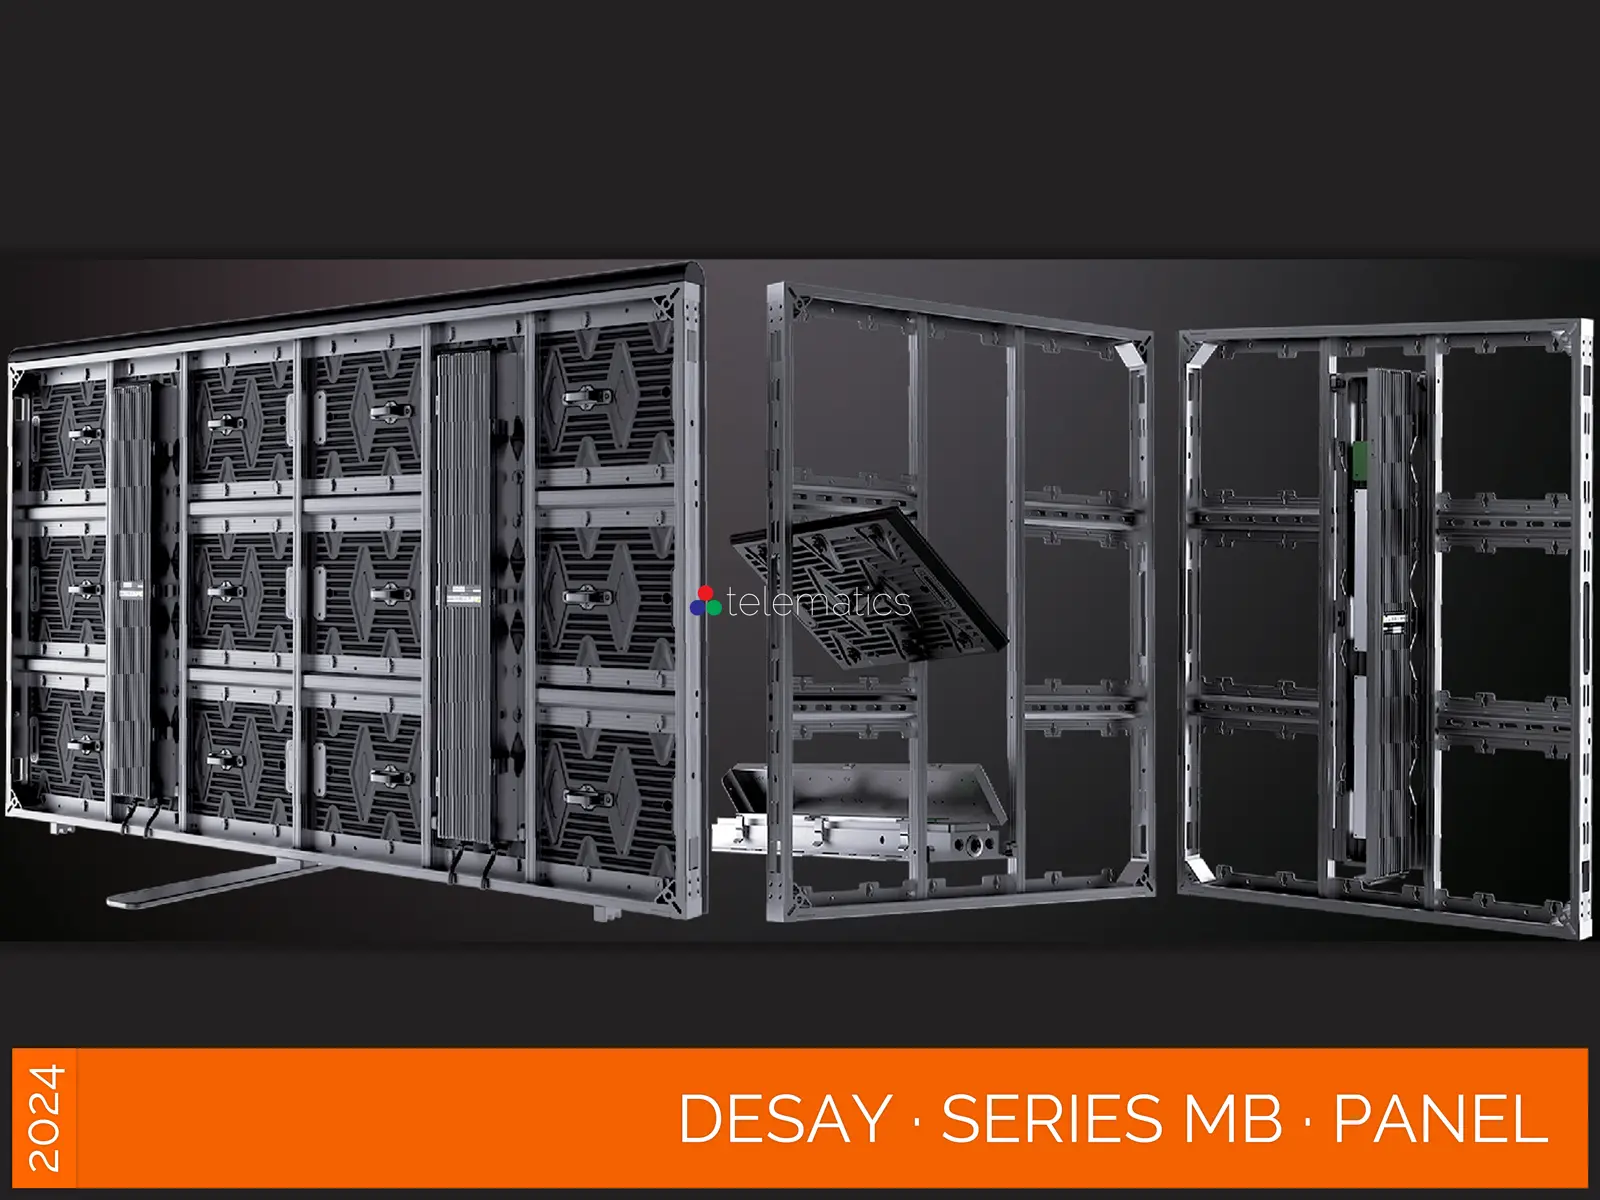 Desay · Series MB · Direct View LED Display Panel · Full Pixel Range · Installation · Digital Sign · Aluminum Extrusion Frame · Outdoor Rated · Easy Front Service · Power Box · NovaStar COEX MX CX · Vision Management Platform · Taurus · Viplex · review · price · cost · priced from $ 1,452 per square meter